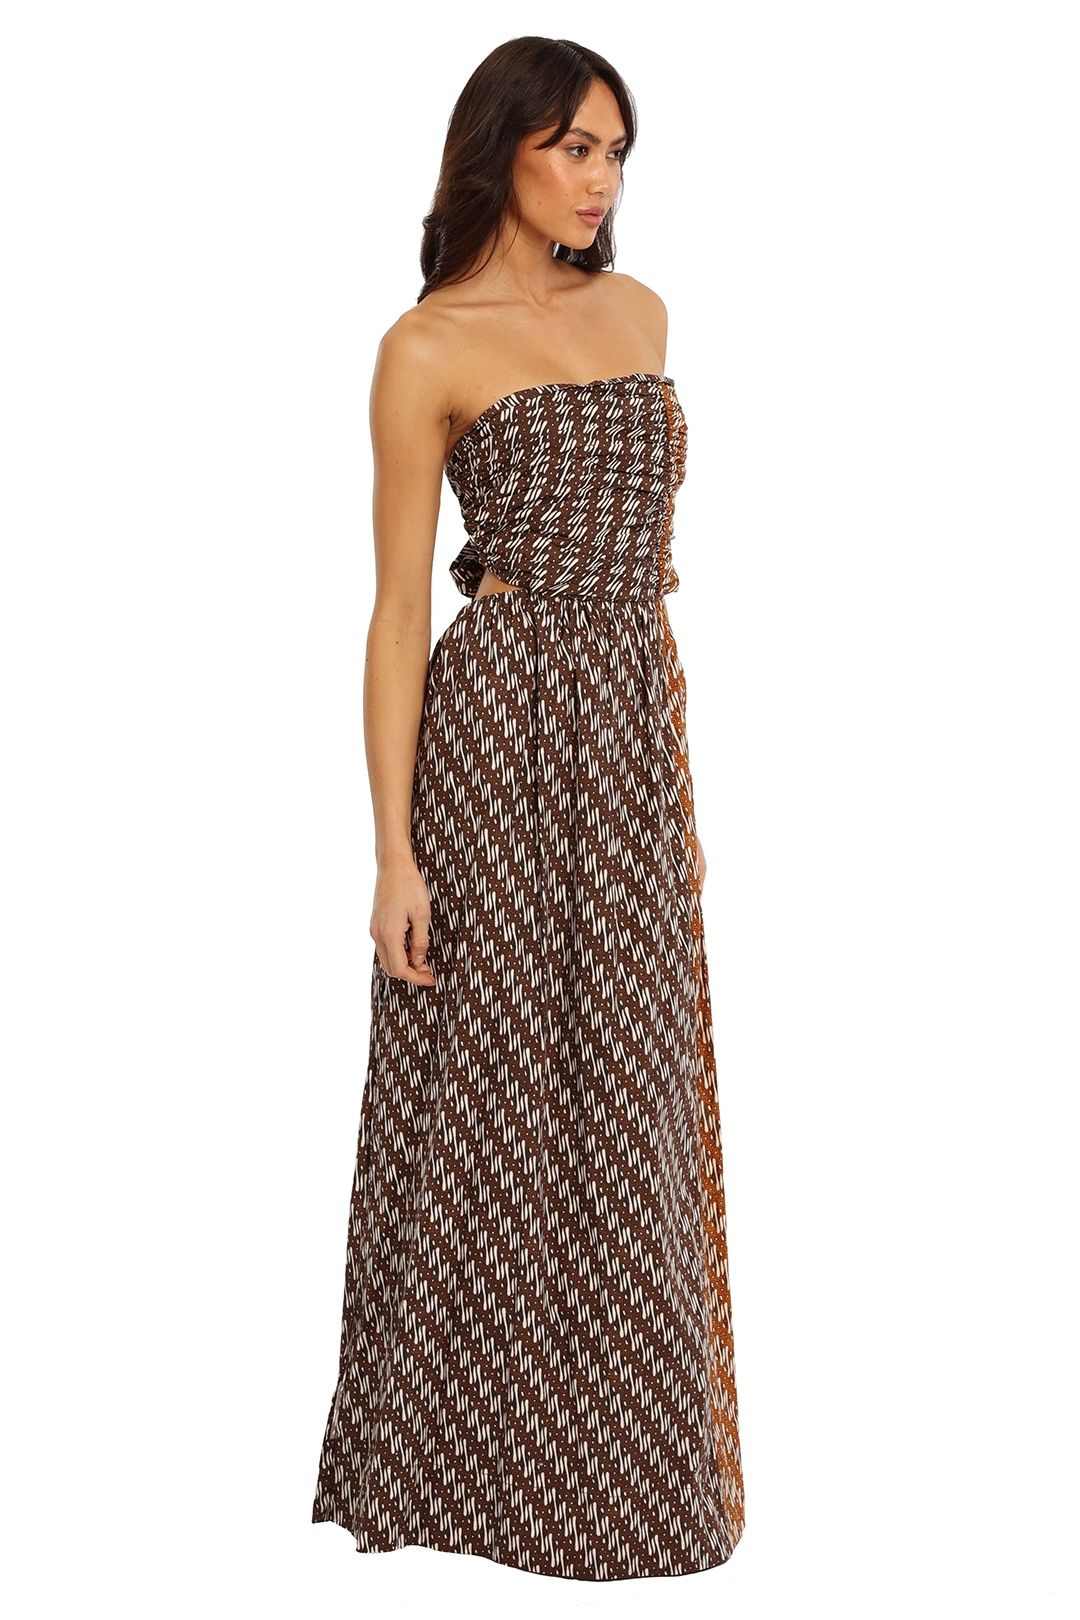 Bassike Strapless Printed Maxi